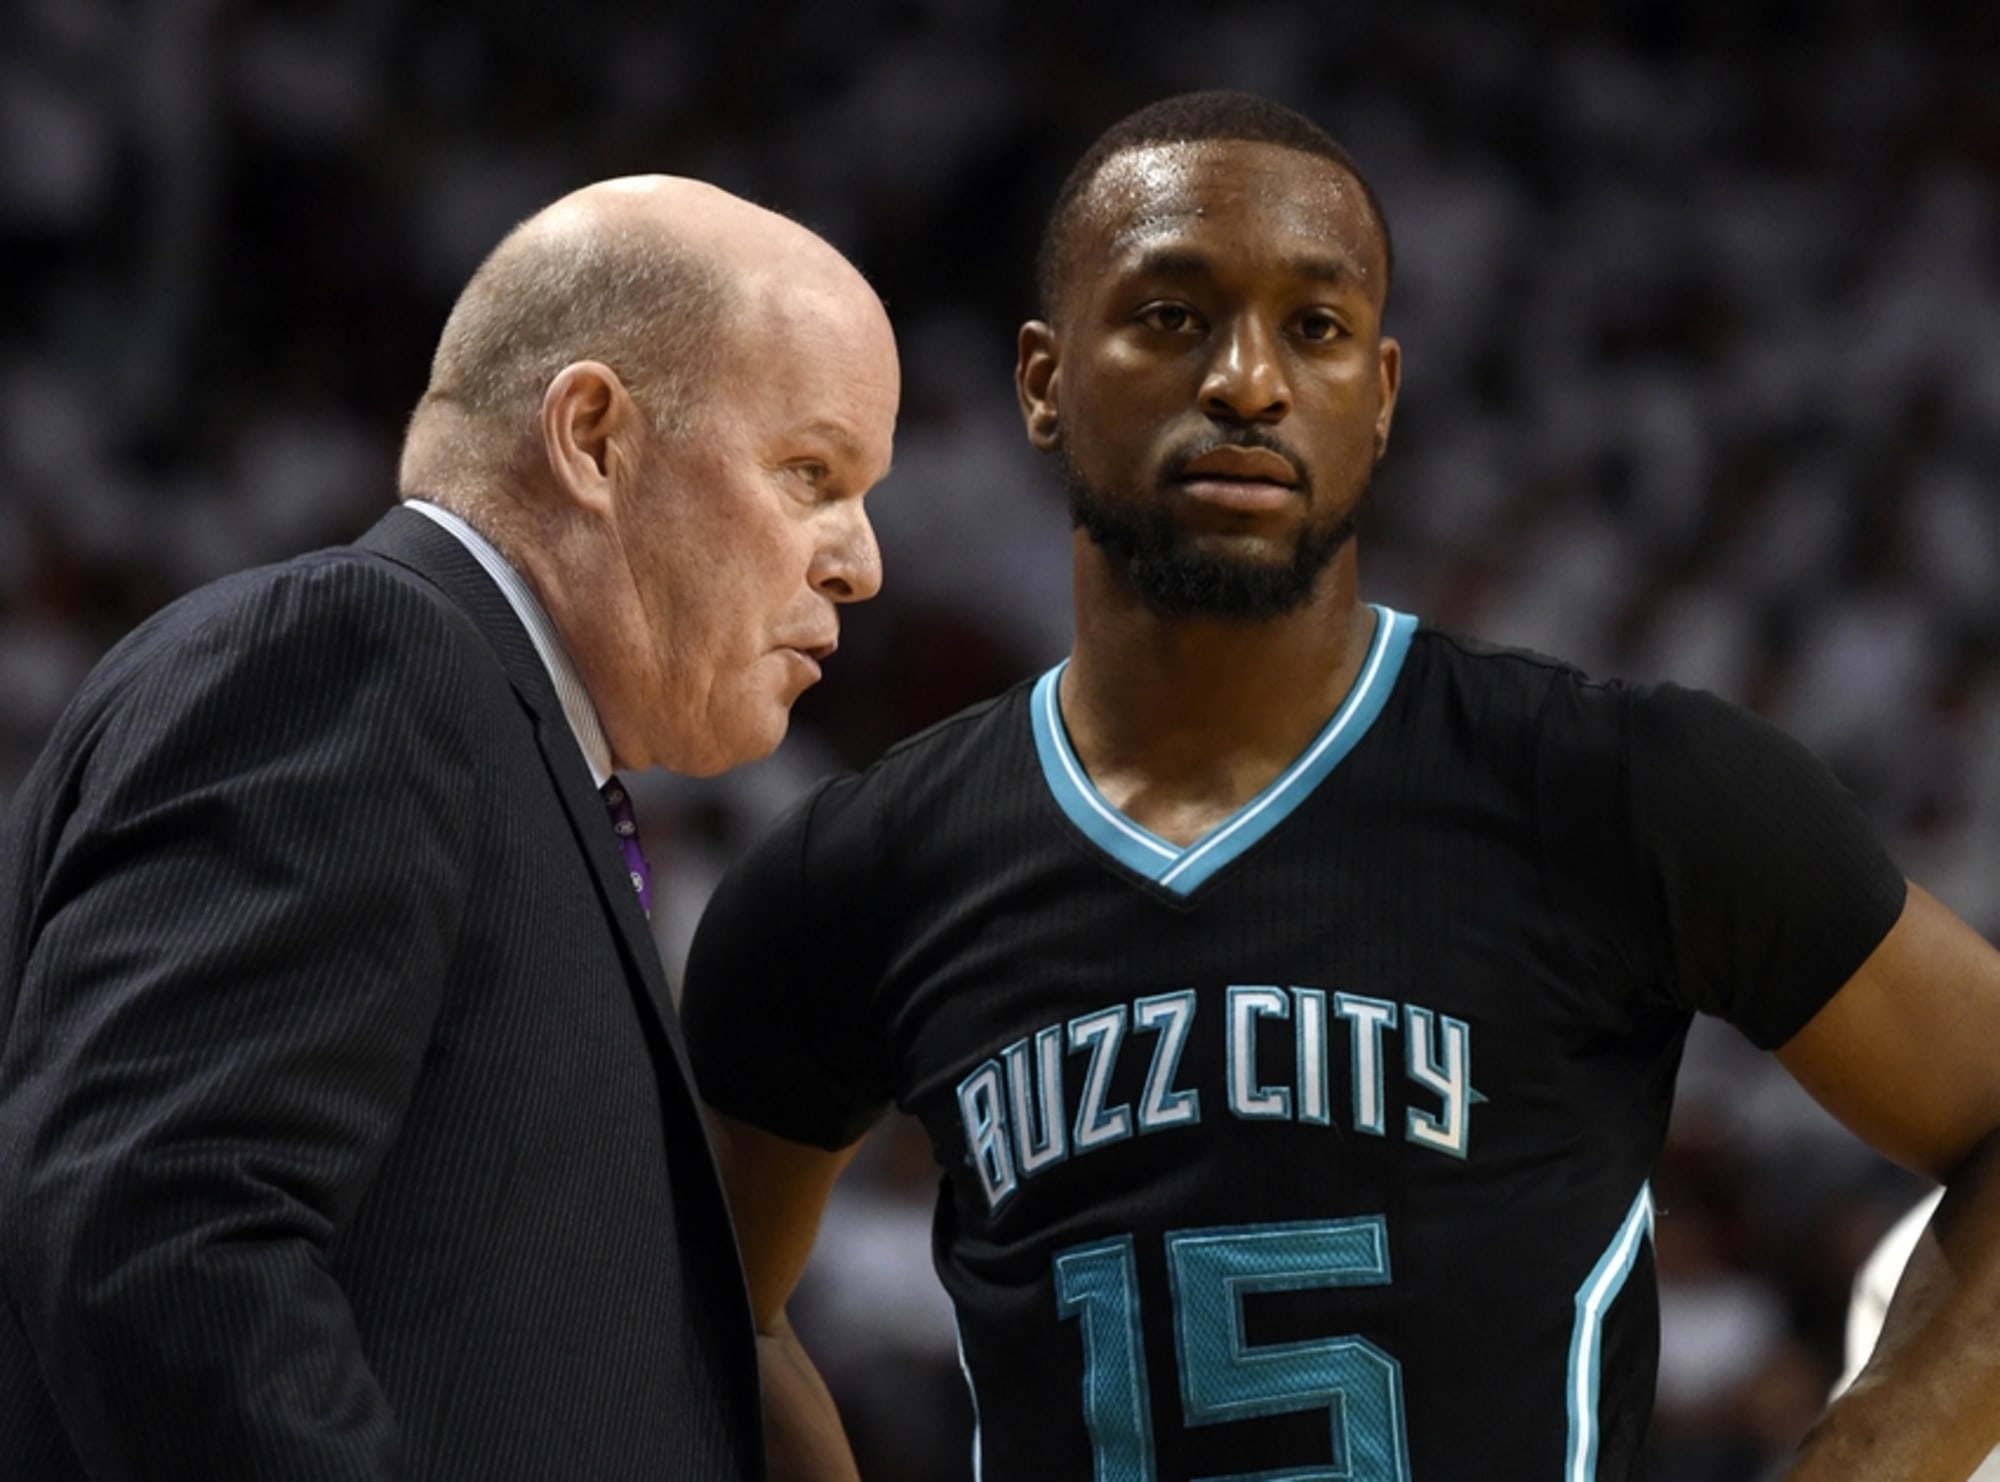 New Charlotte Hornets' uniforms are 'Buzz City' worthy